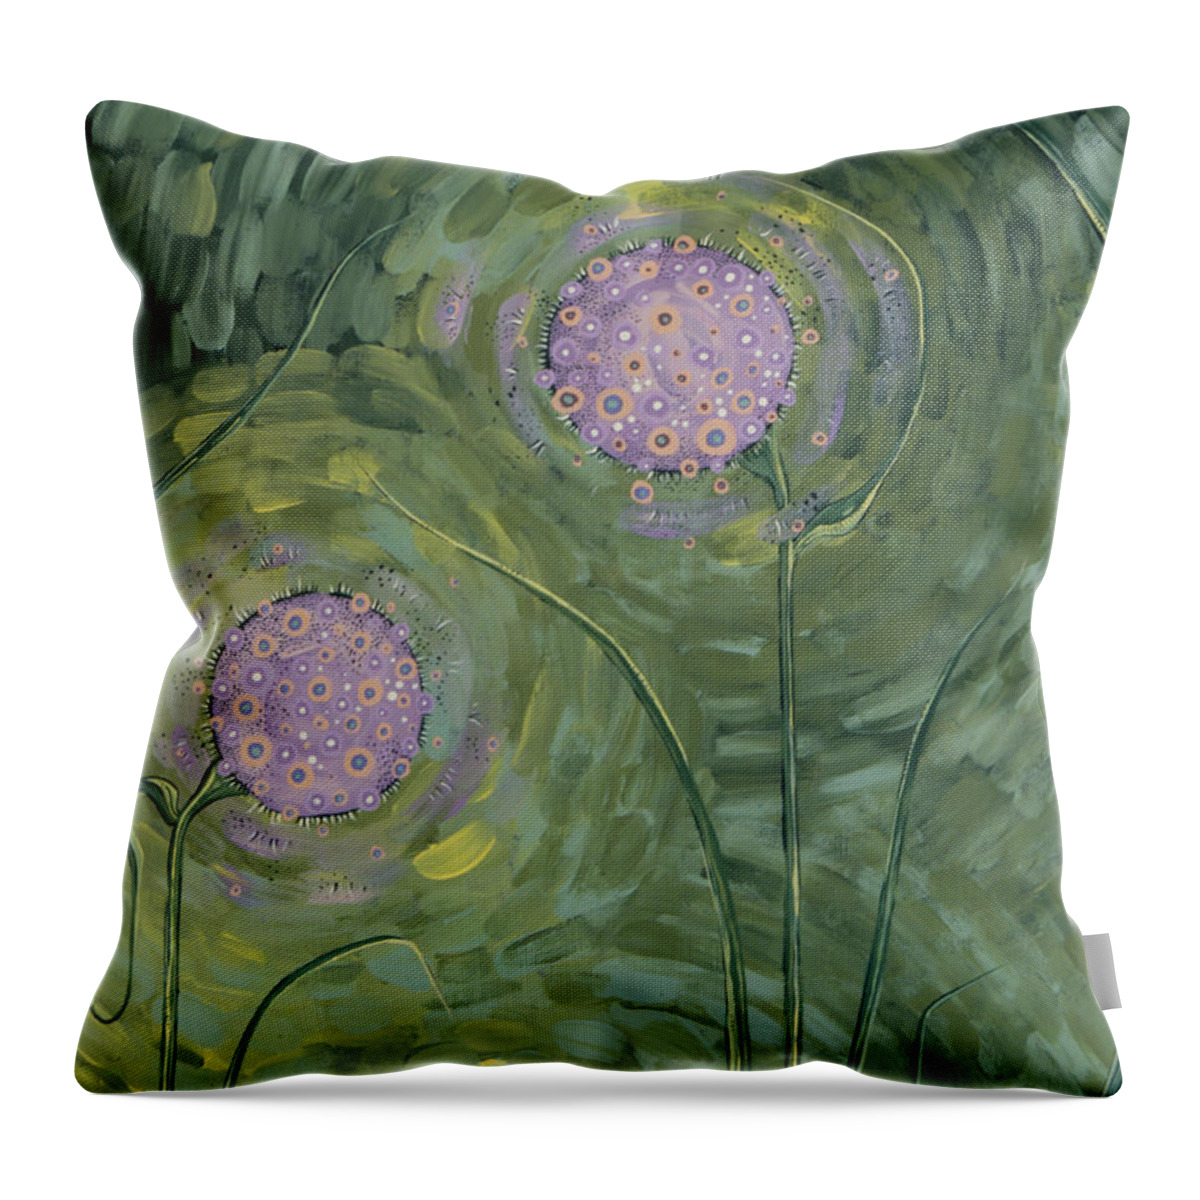 Floral Throw Pillow featuring the painting Tranquility by Tanielle Childers